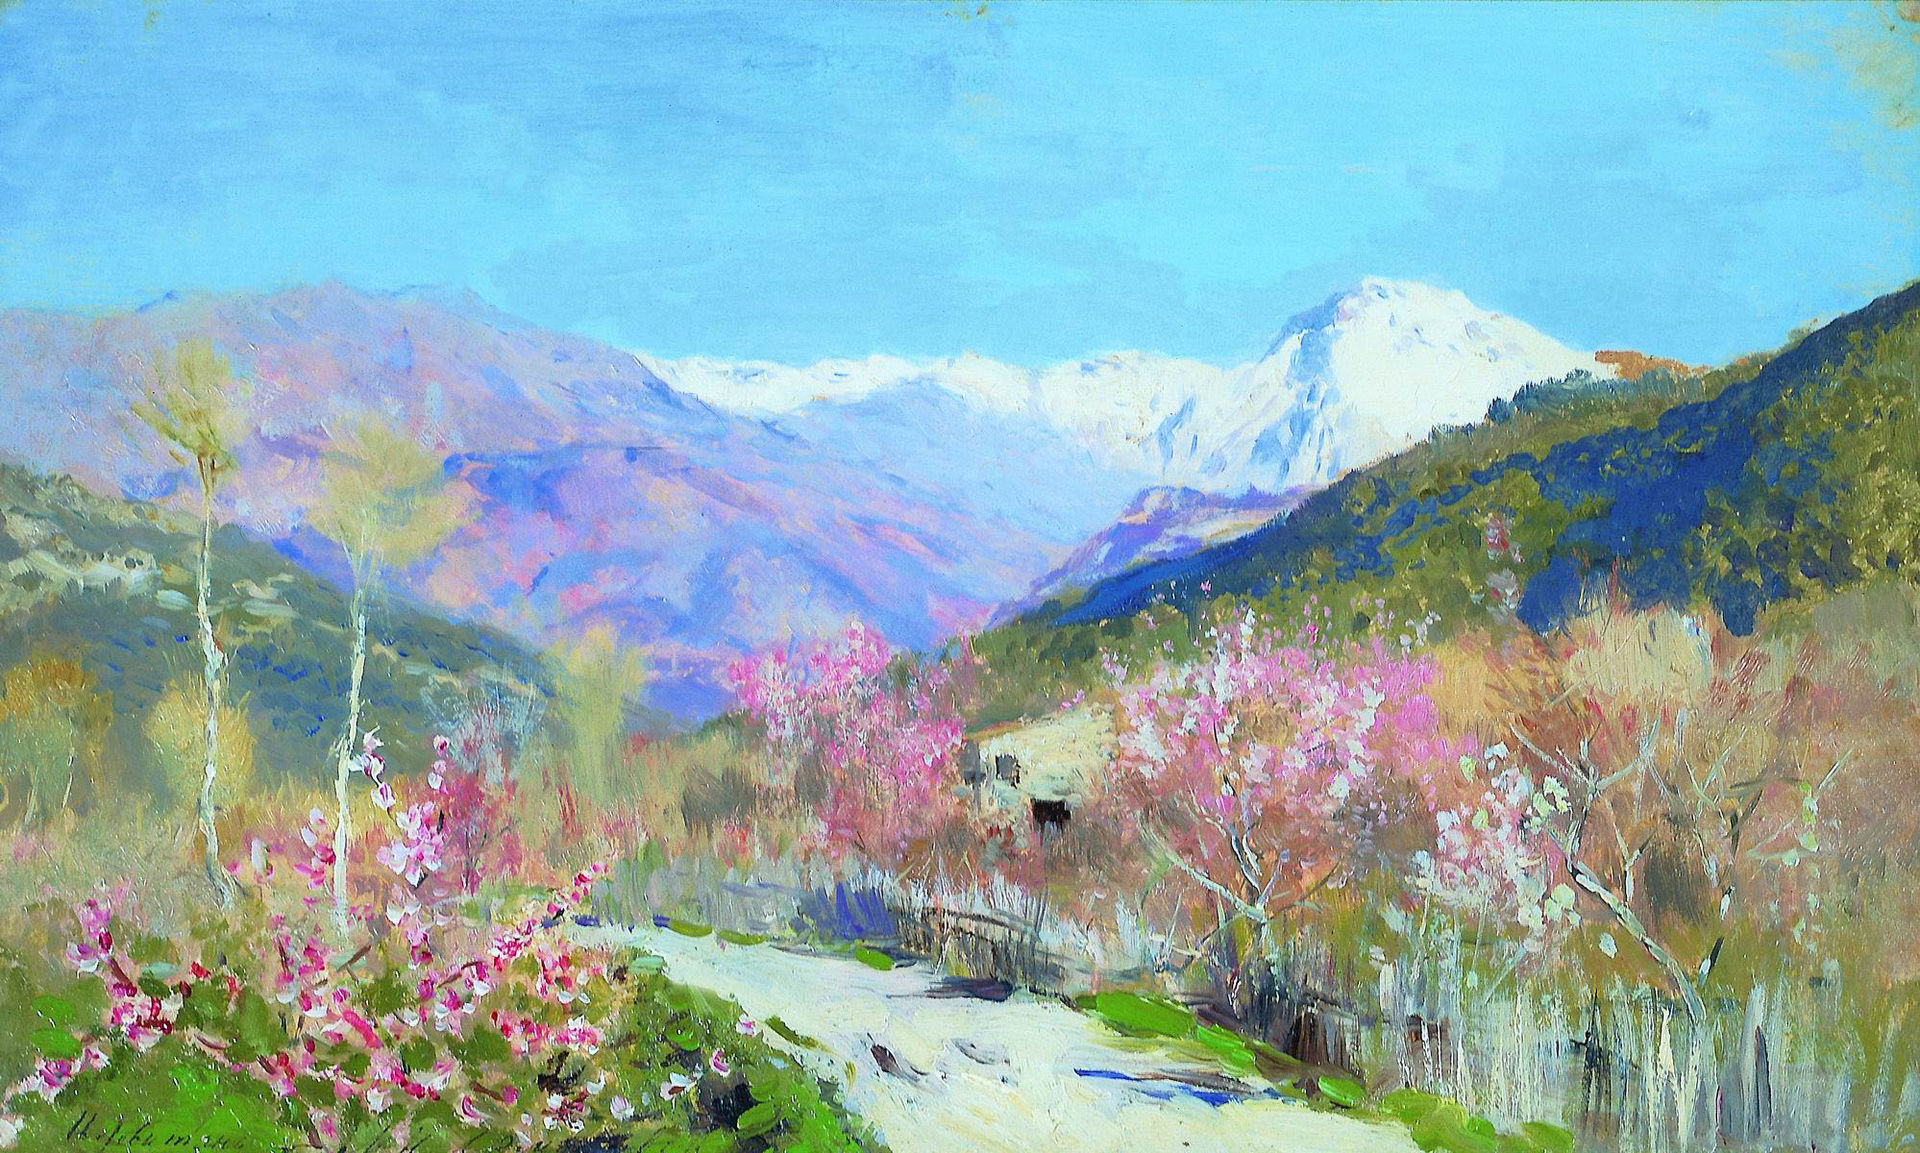 Inspiration: “Spring in Italy” by Isaac Levitan